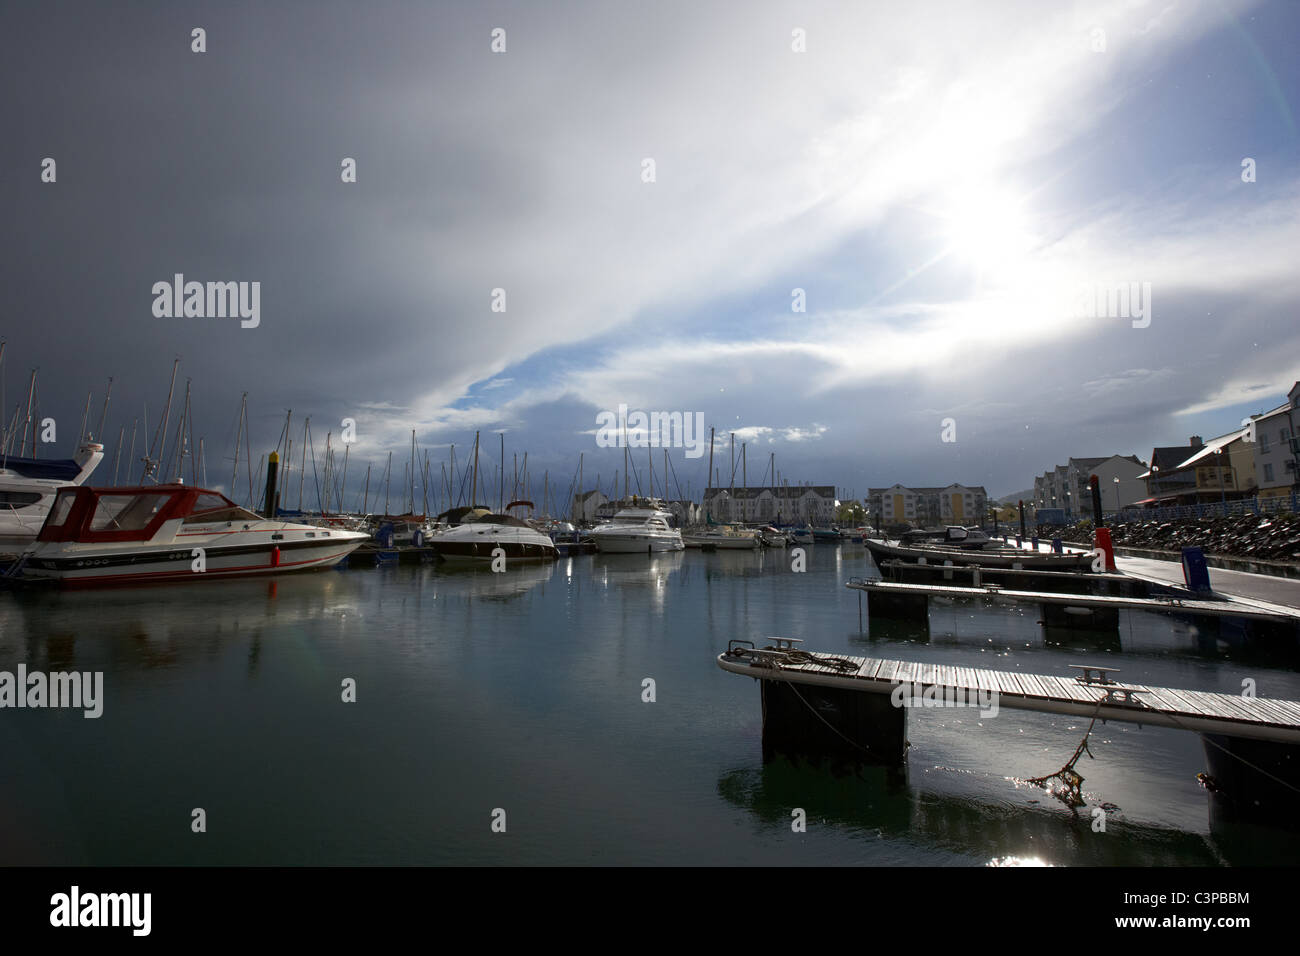 stormy bad weather clearing over marina harbour in the uk Stock Photo